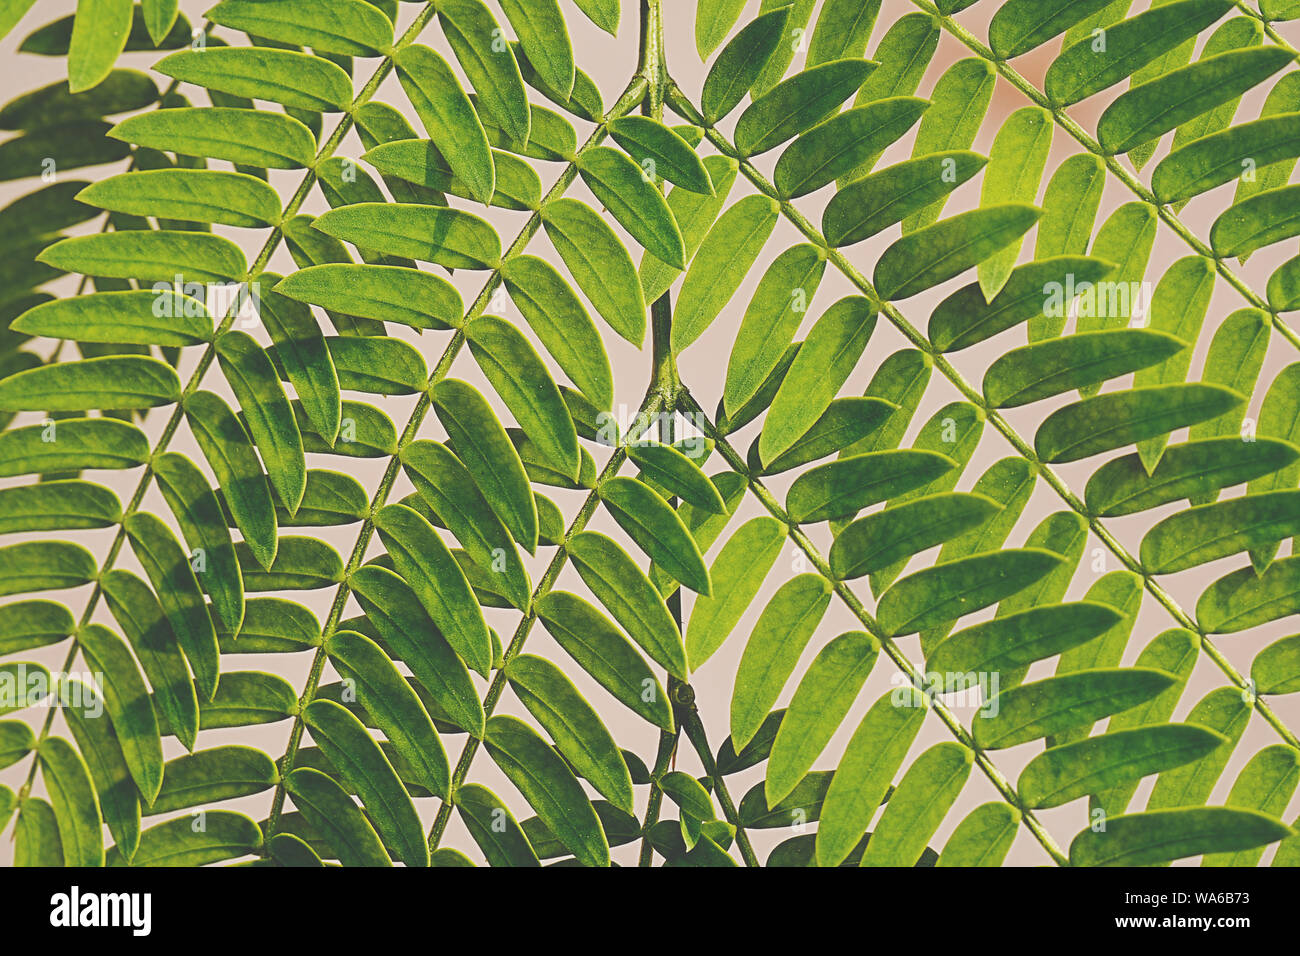 Ferns in rhododendron forest close-up. Nepal, Gorepani. Close up image Stock Photo